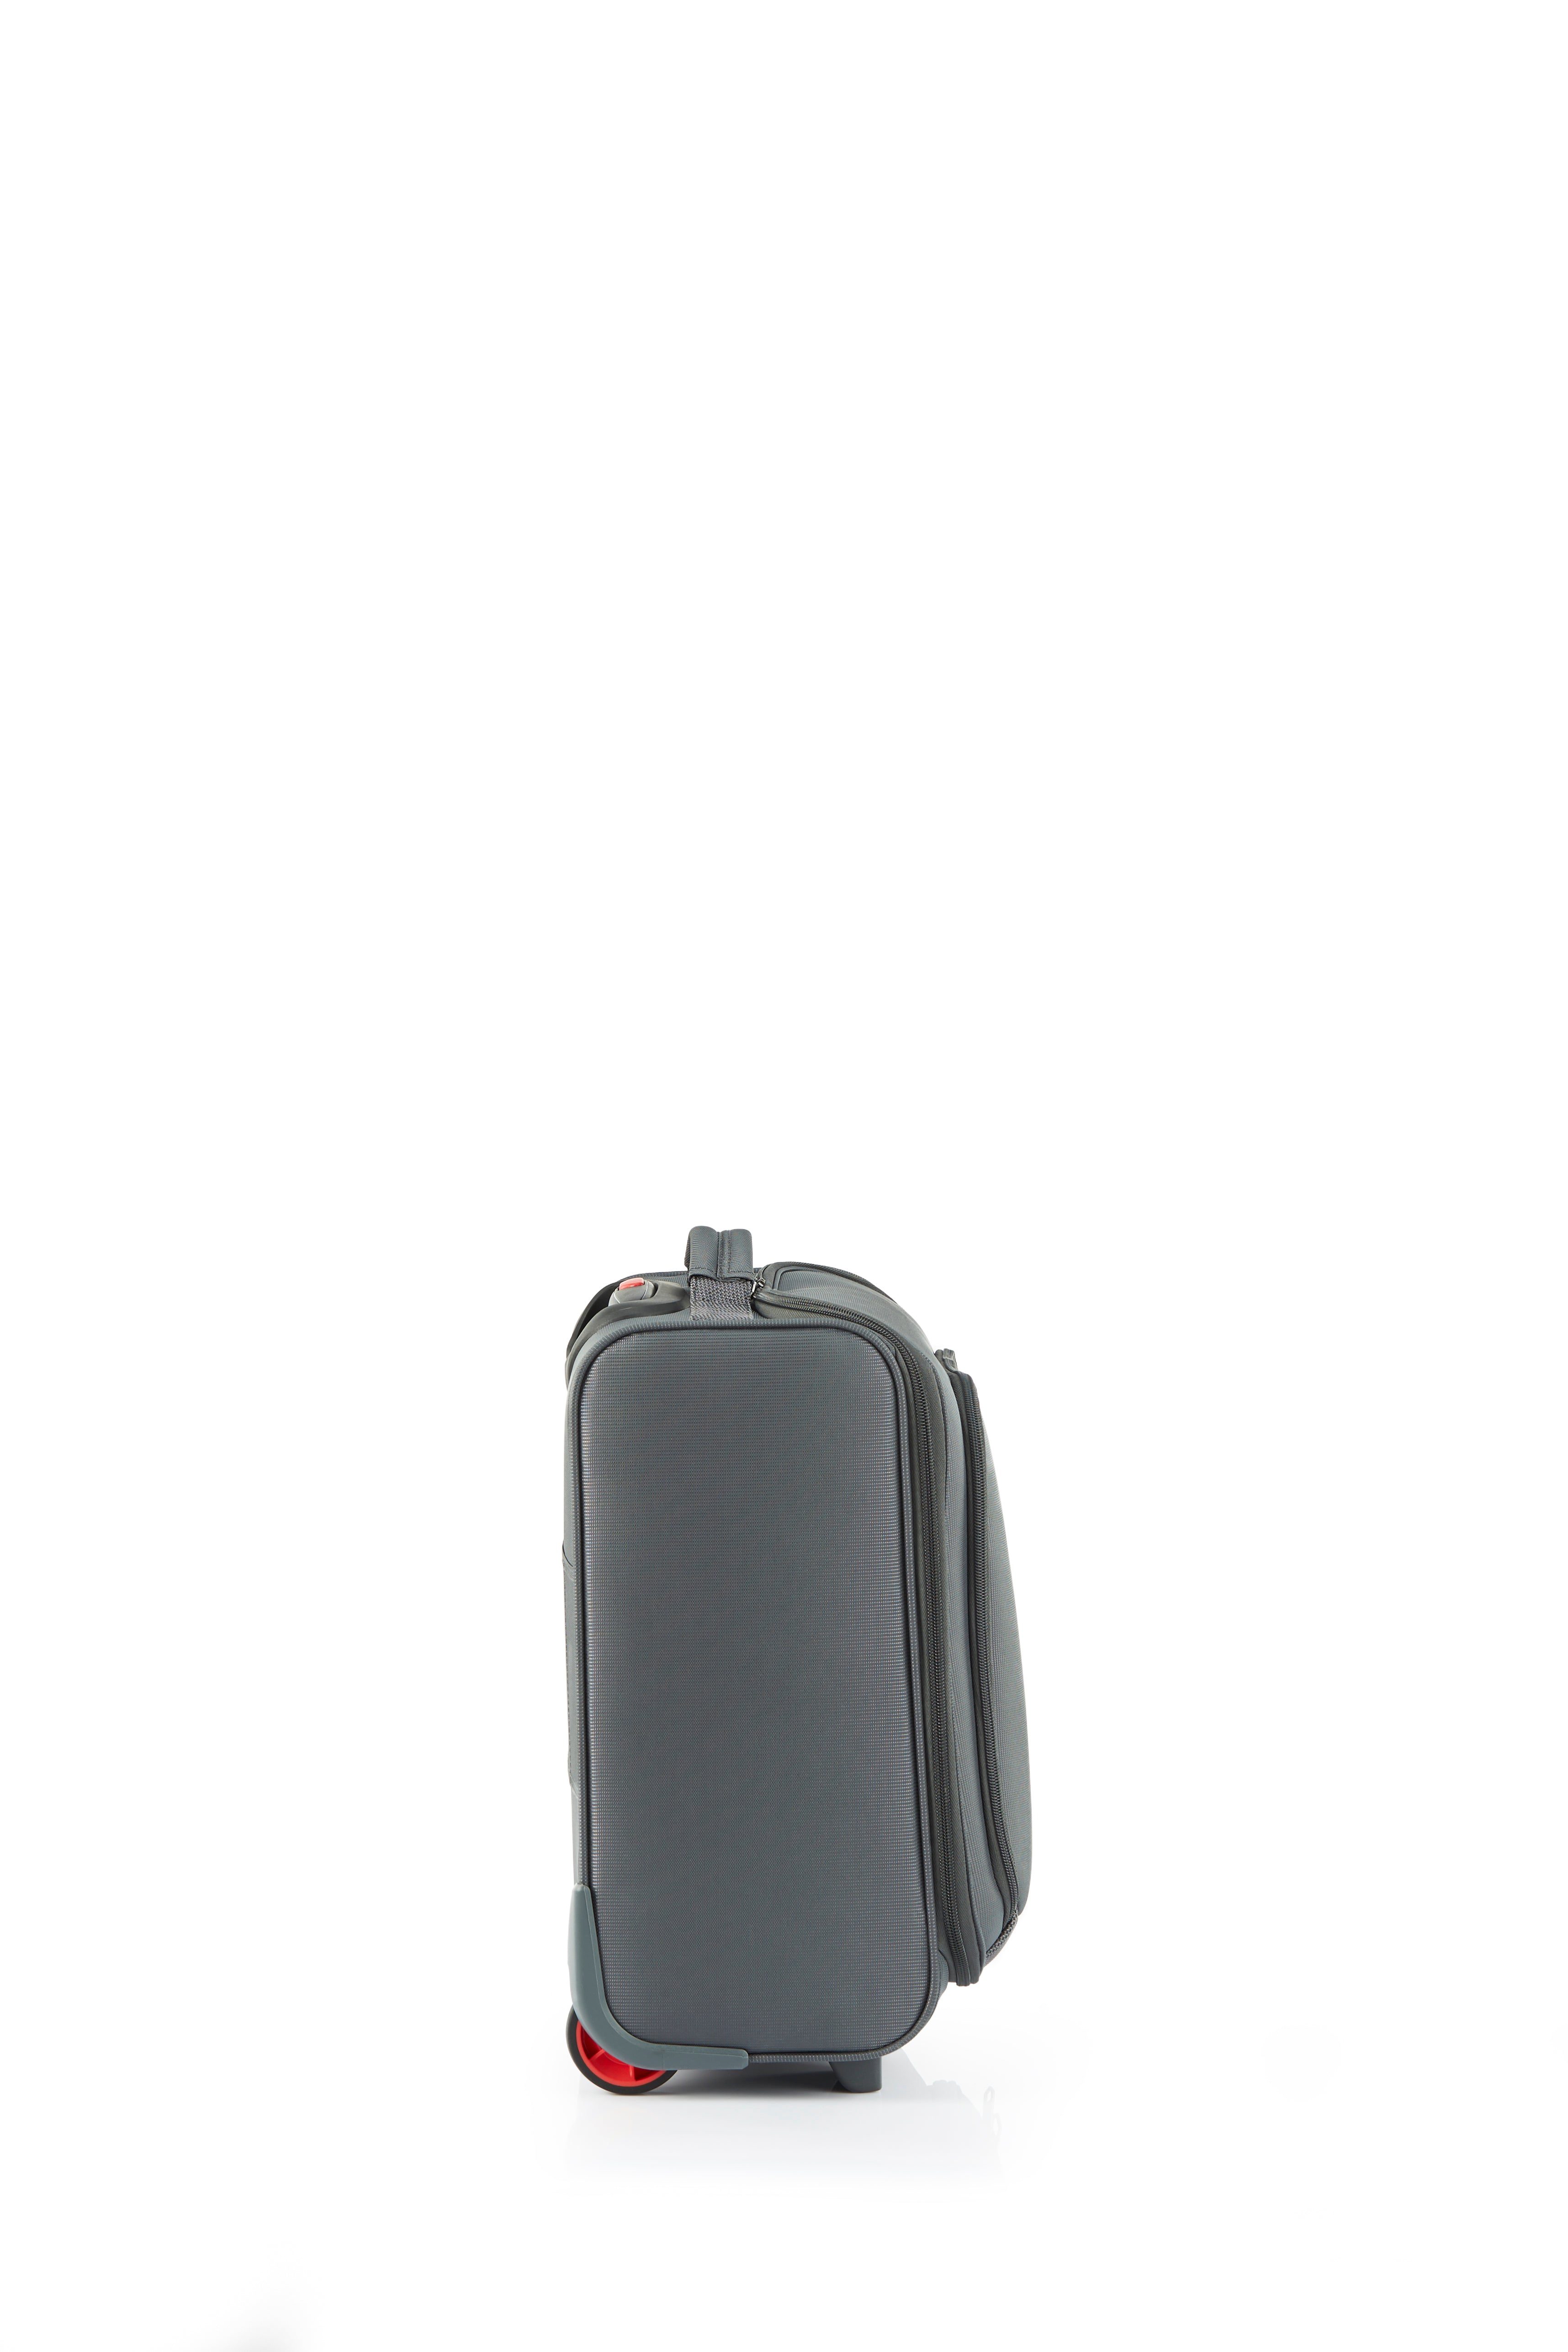 American Tourister - Applite ECO Underseater Suitcase - Grey/Red-3